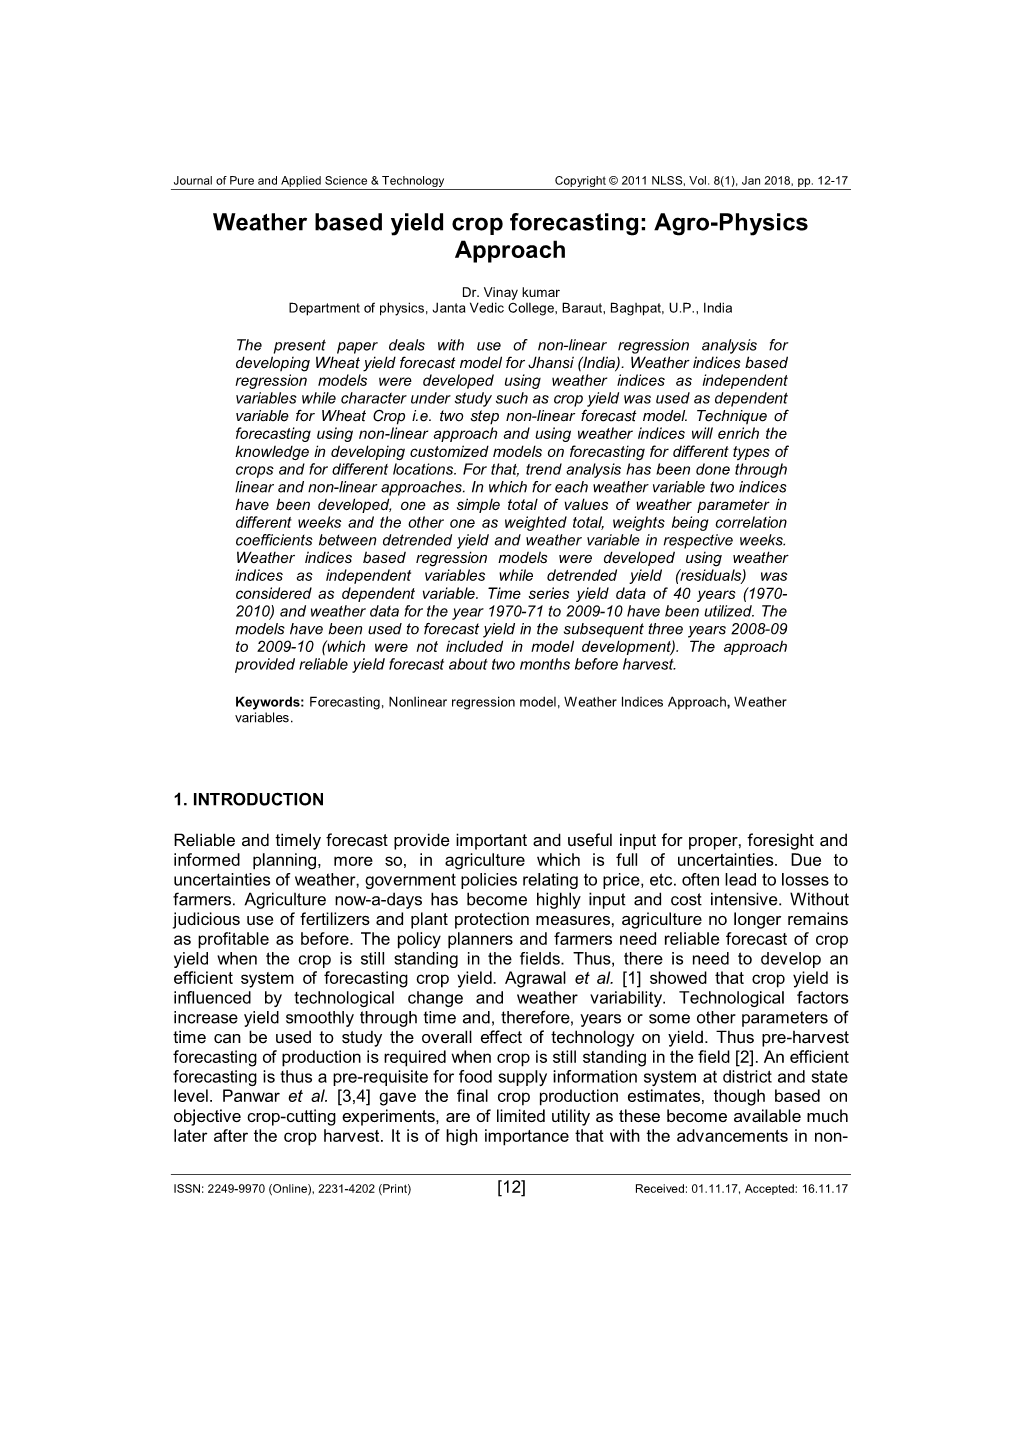 Weather Based Yield Crop Forecasting: Agro-Physics Approach